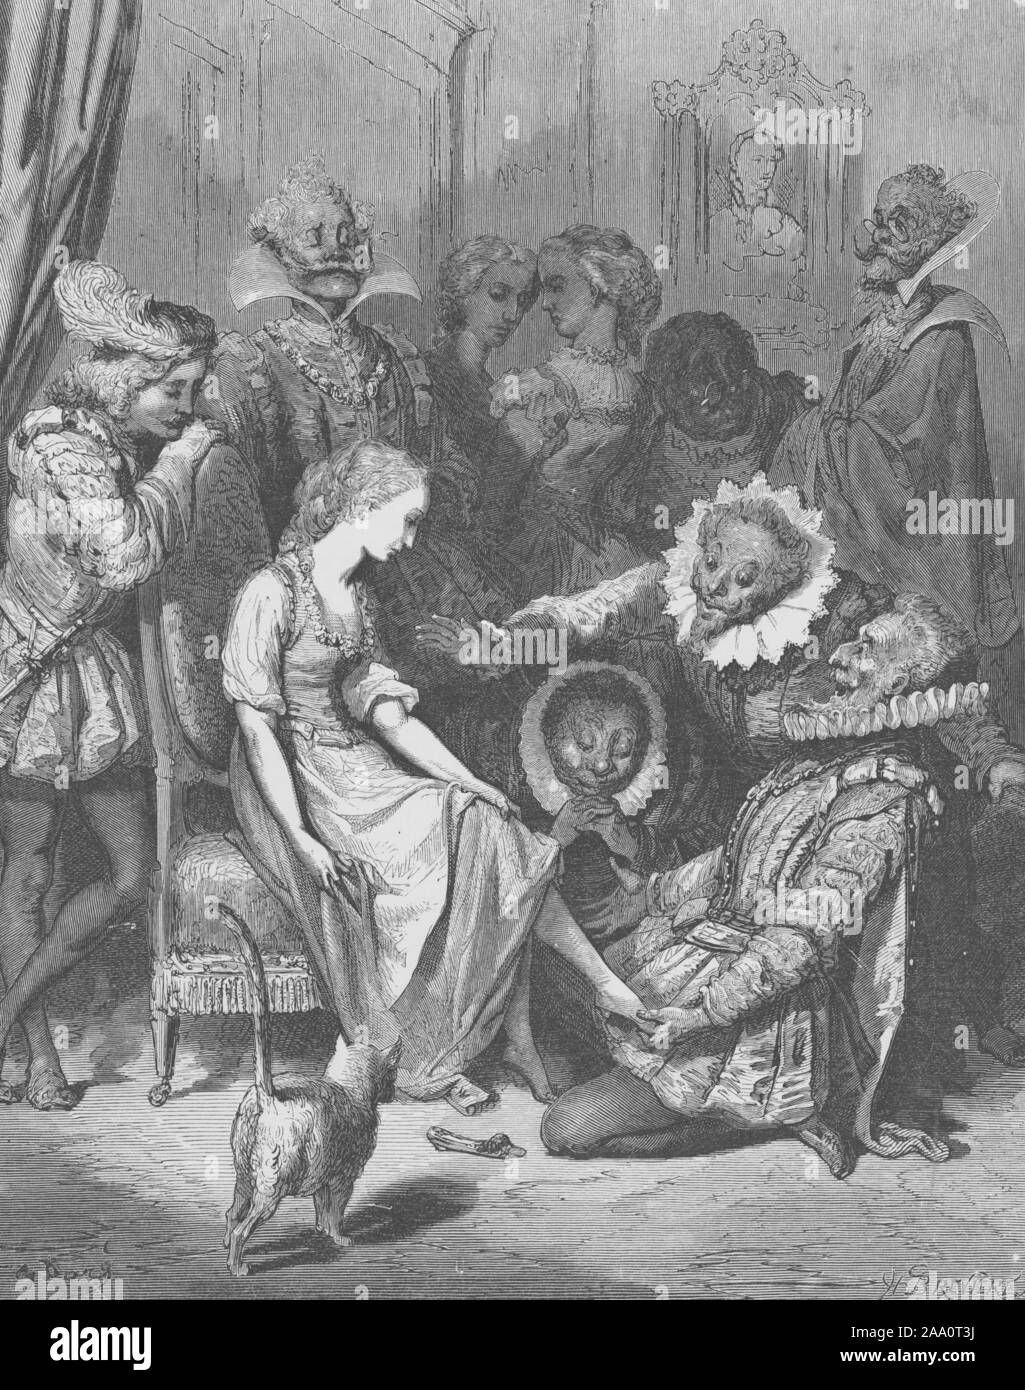 Monochrome illustration of a scene from the book 'Fairy Realm: A Collection of the Favourite Old Tales' by author Tom Hood, featuring Cinderella trying on the glass slipper surrounded by a group of people, illustrated by Gustave Dore, engraved Louis Henri Breviere, published by Cassell, Petter, and Galpin, 1865. From the New York Public Library. () Stock Photo